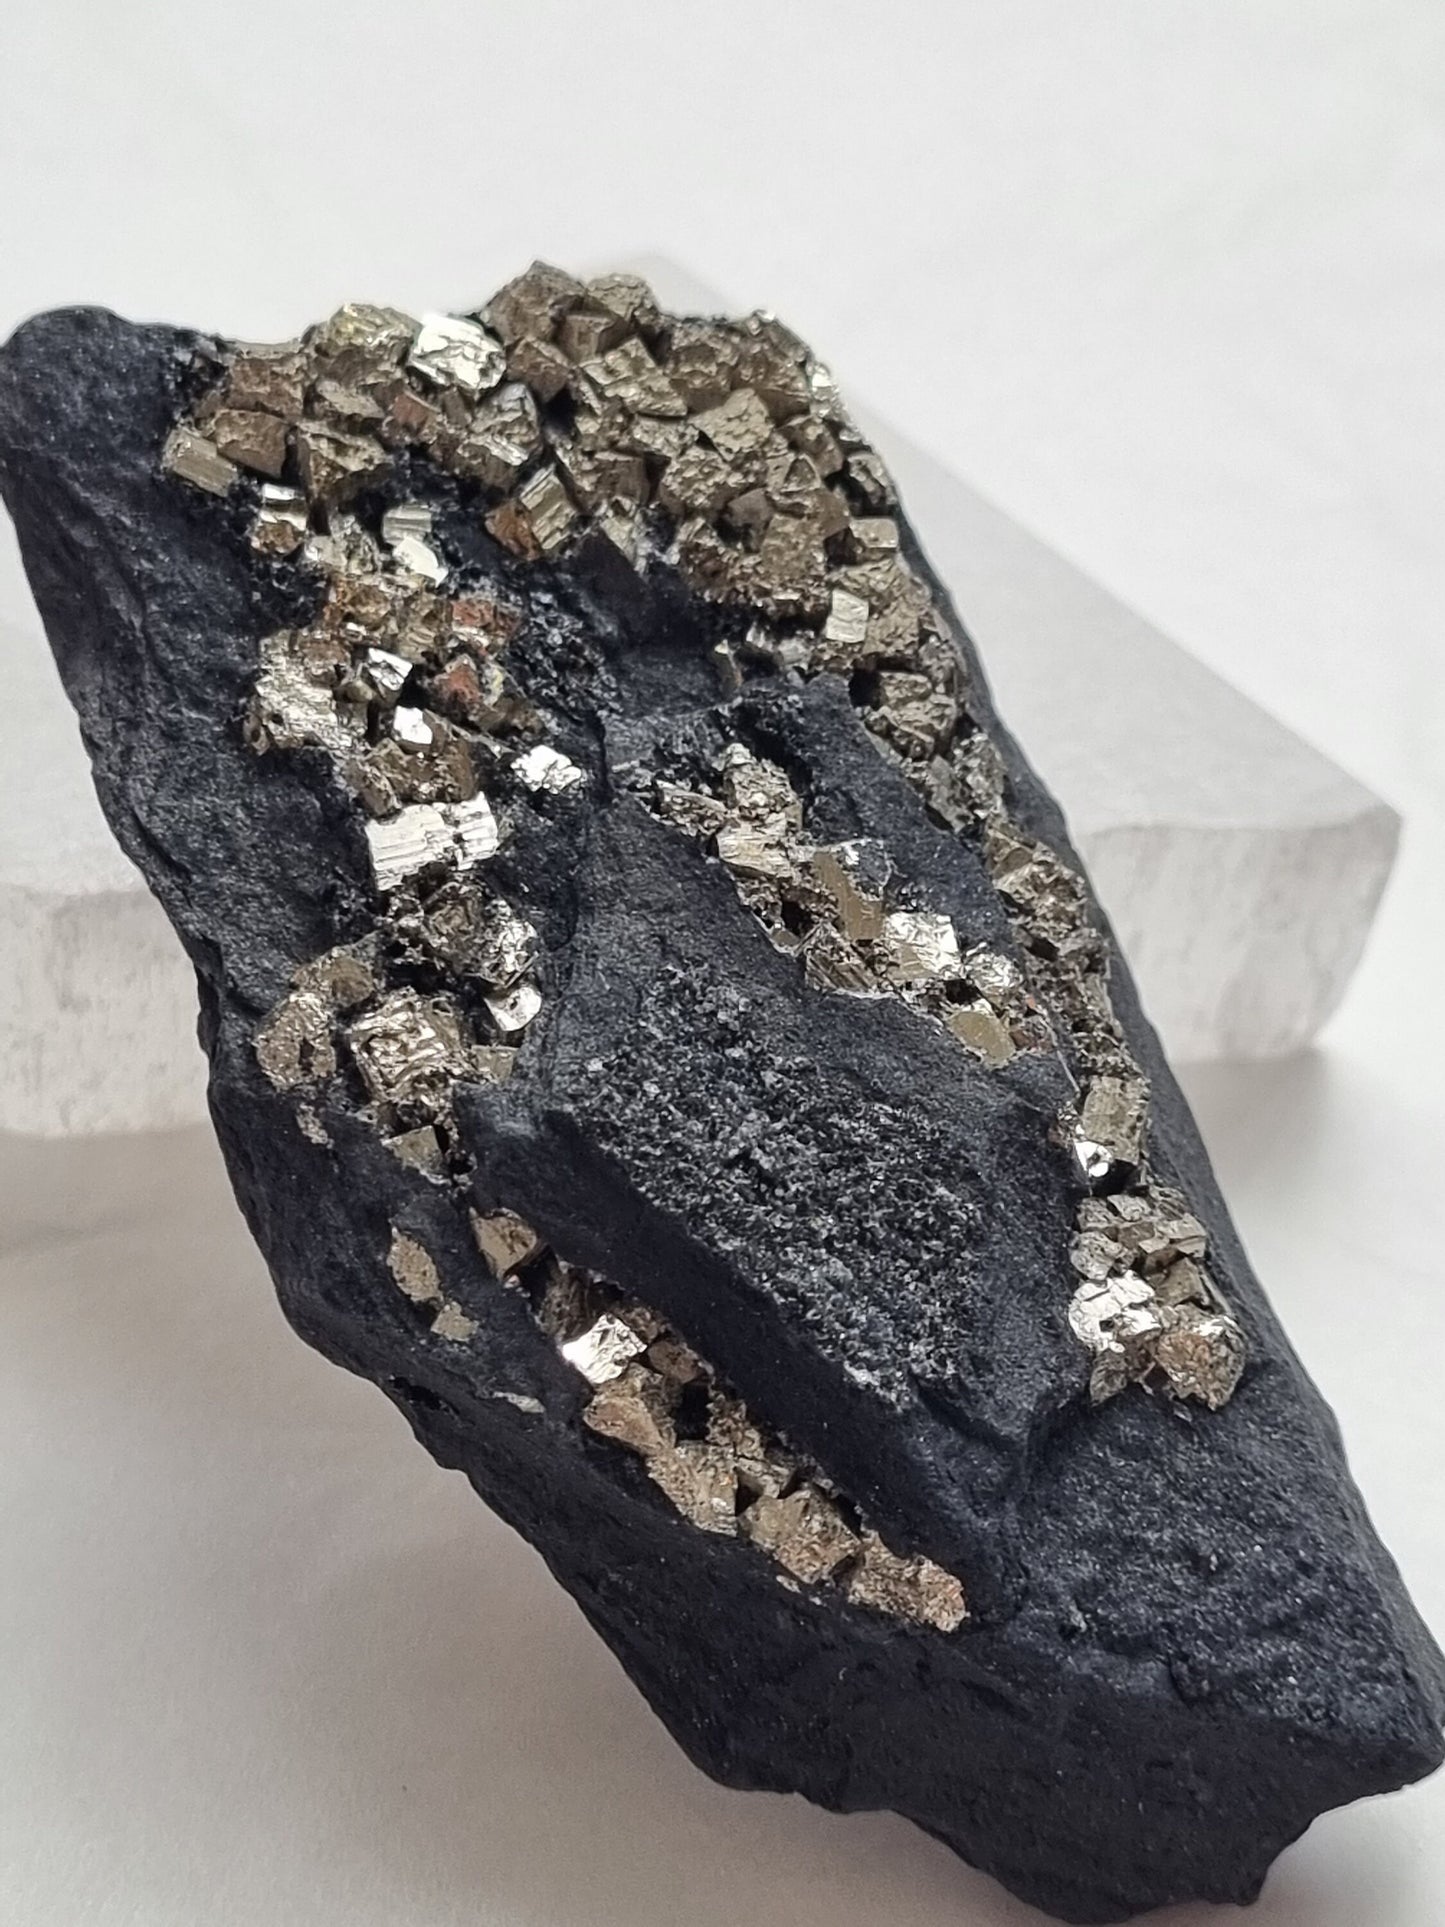 Pyrite on Basalt / Raw crystals / Crystals with pyrite inclusions